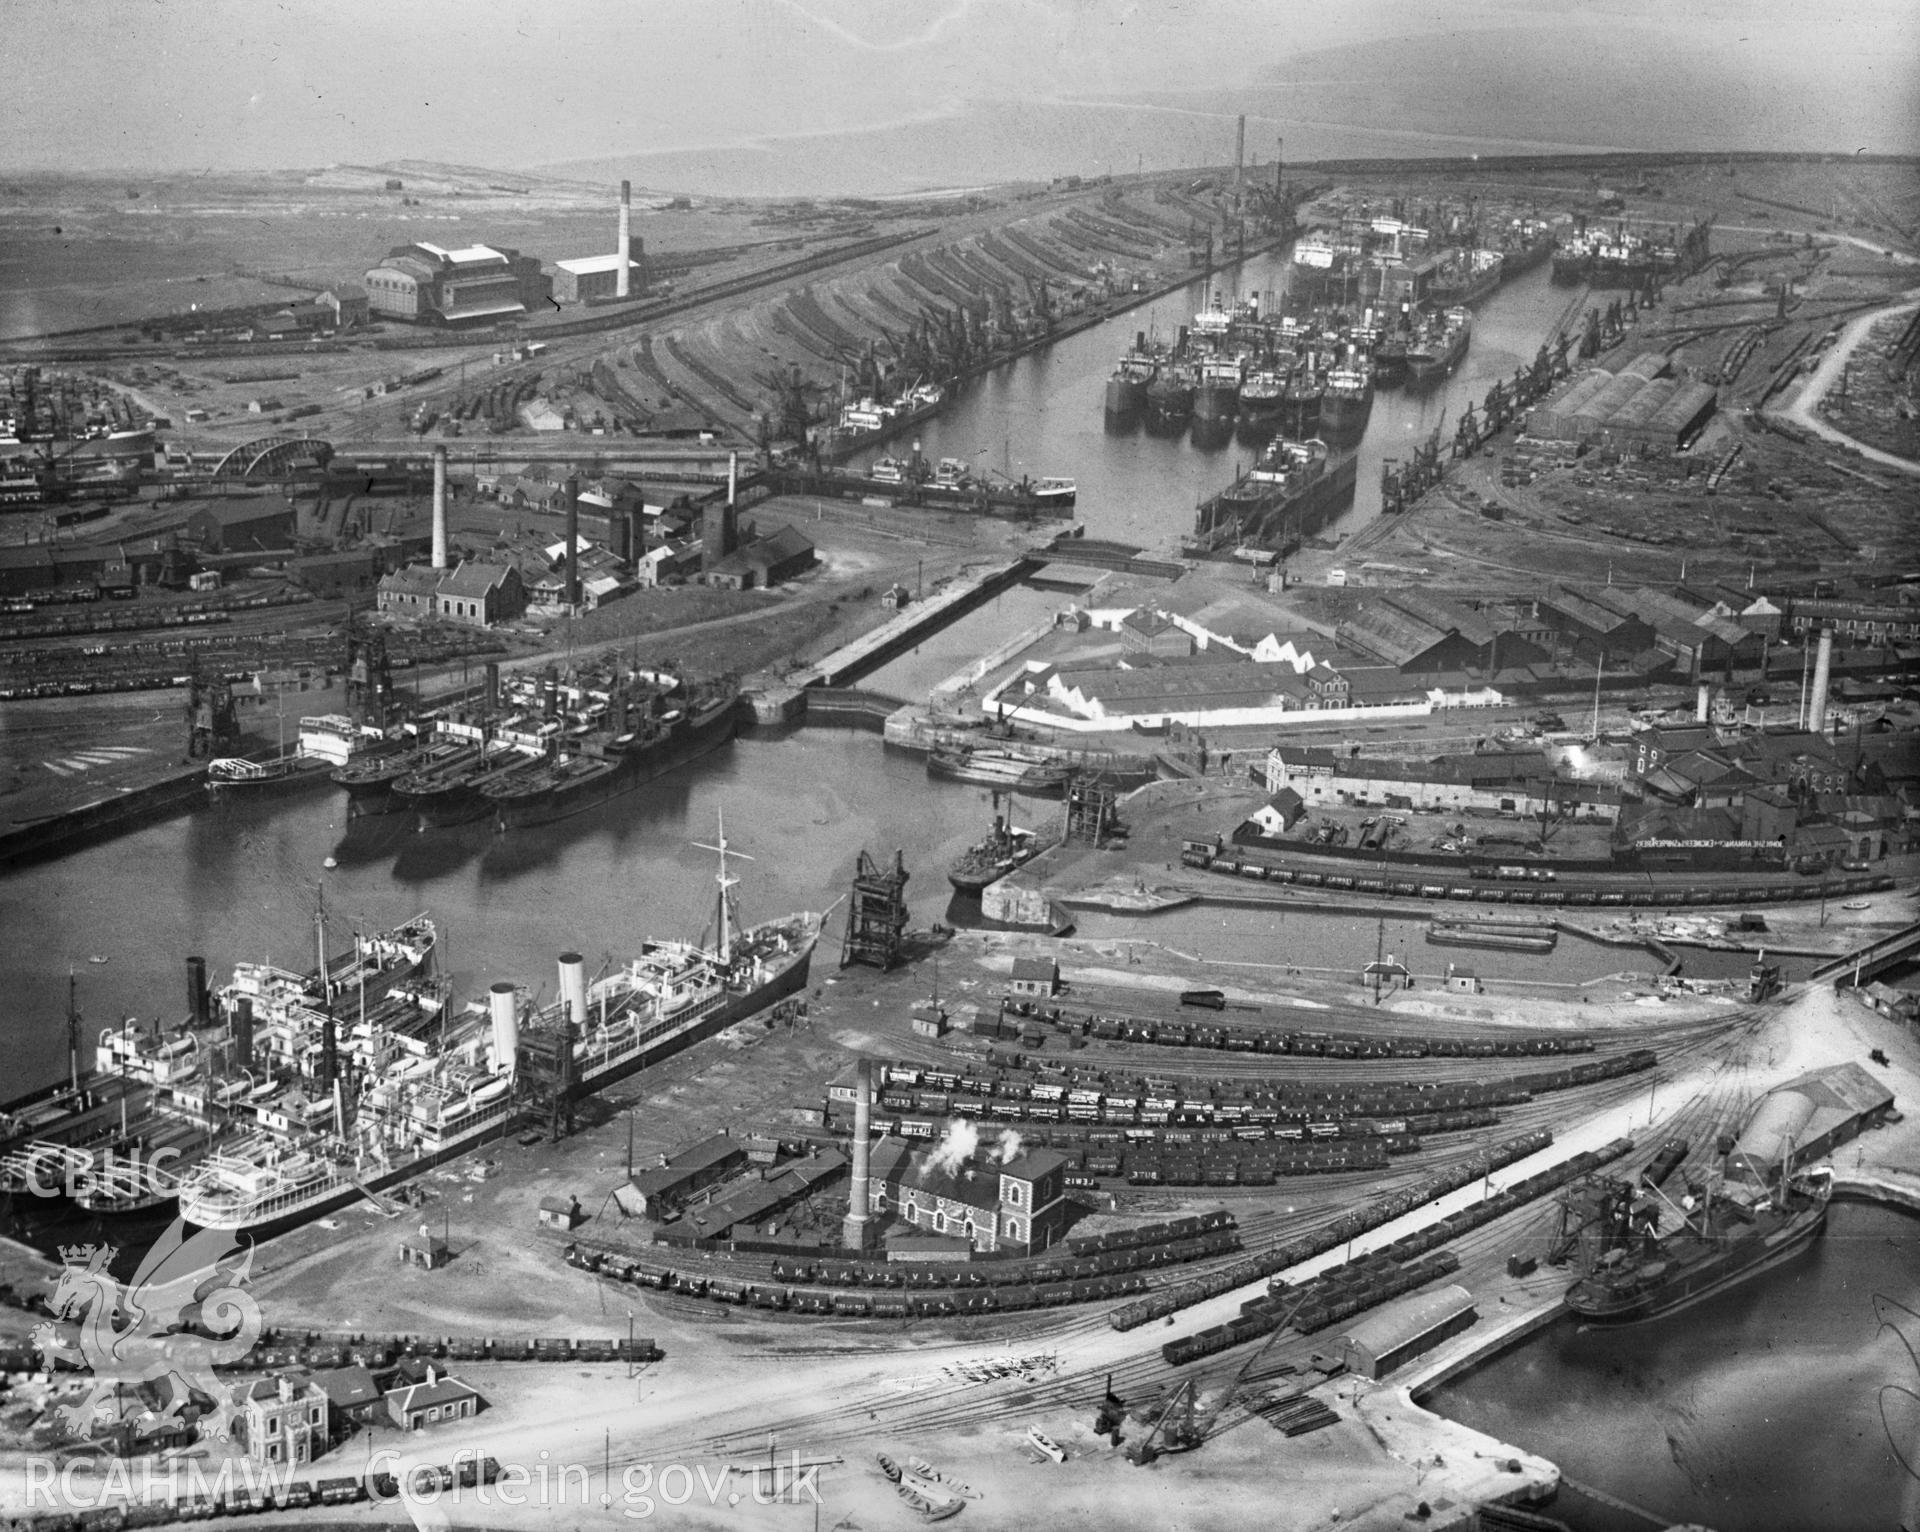 General view of Cardiff docks, oblique aerial view. 5?x4? black and white glass plate negative.